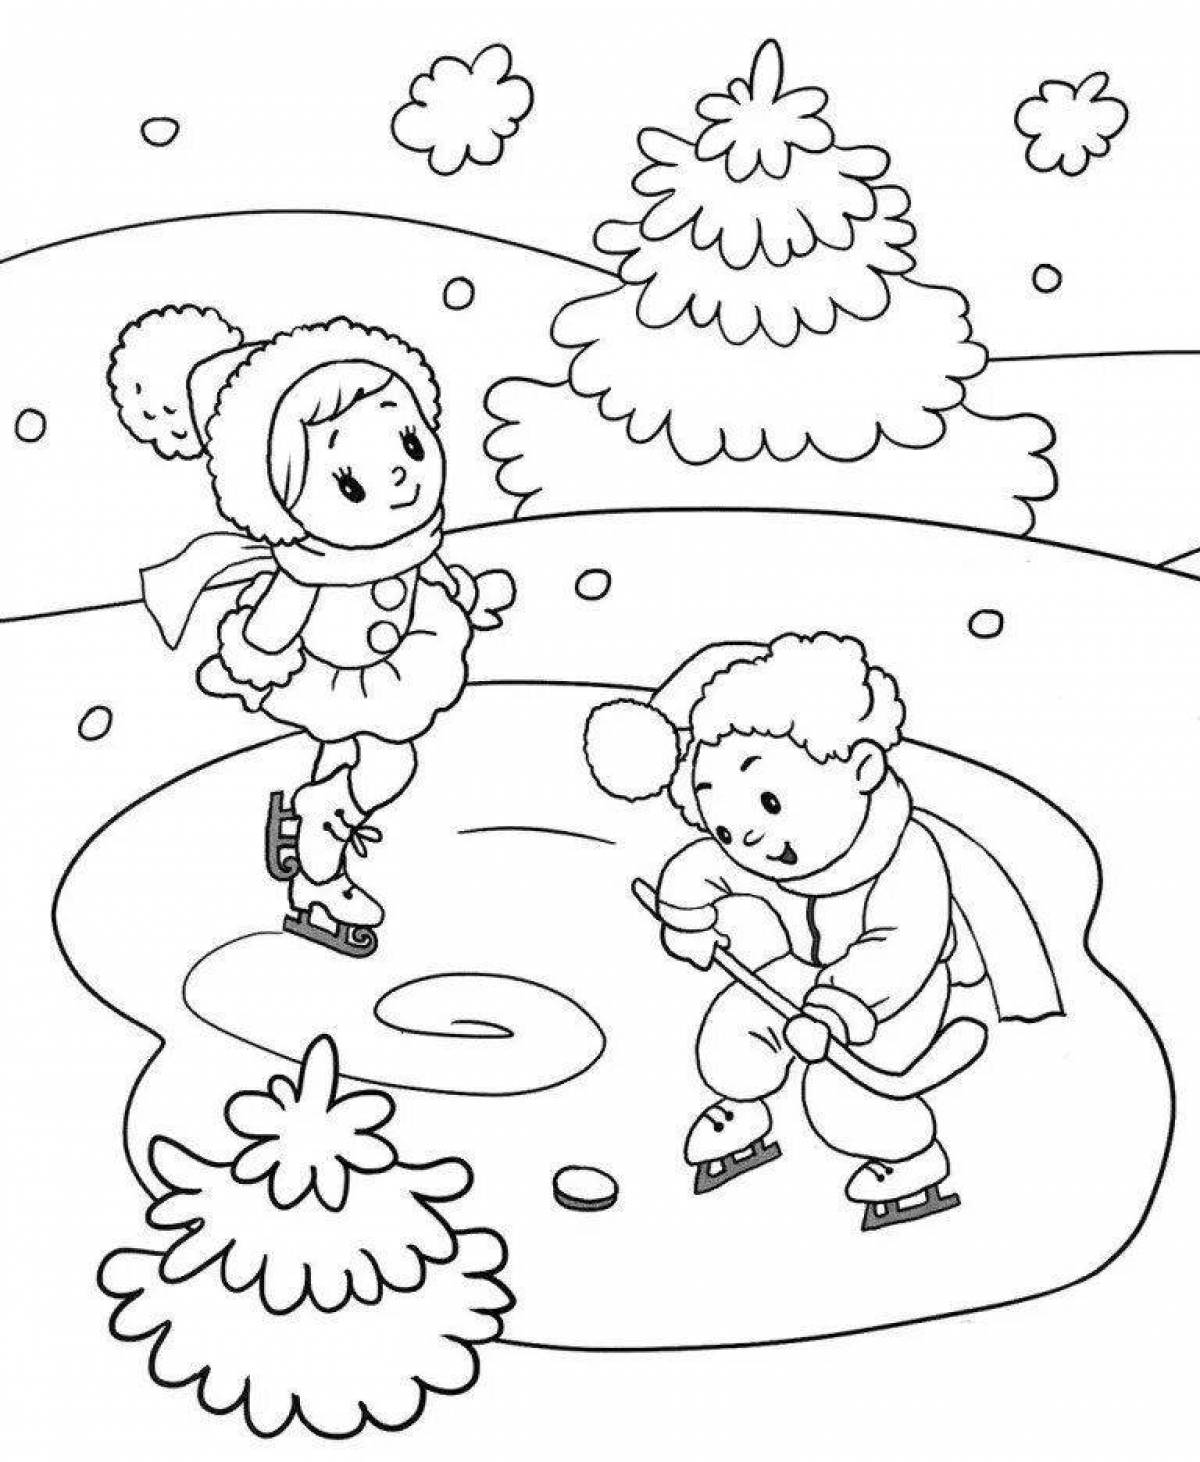 Innovative winter games coloring book